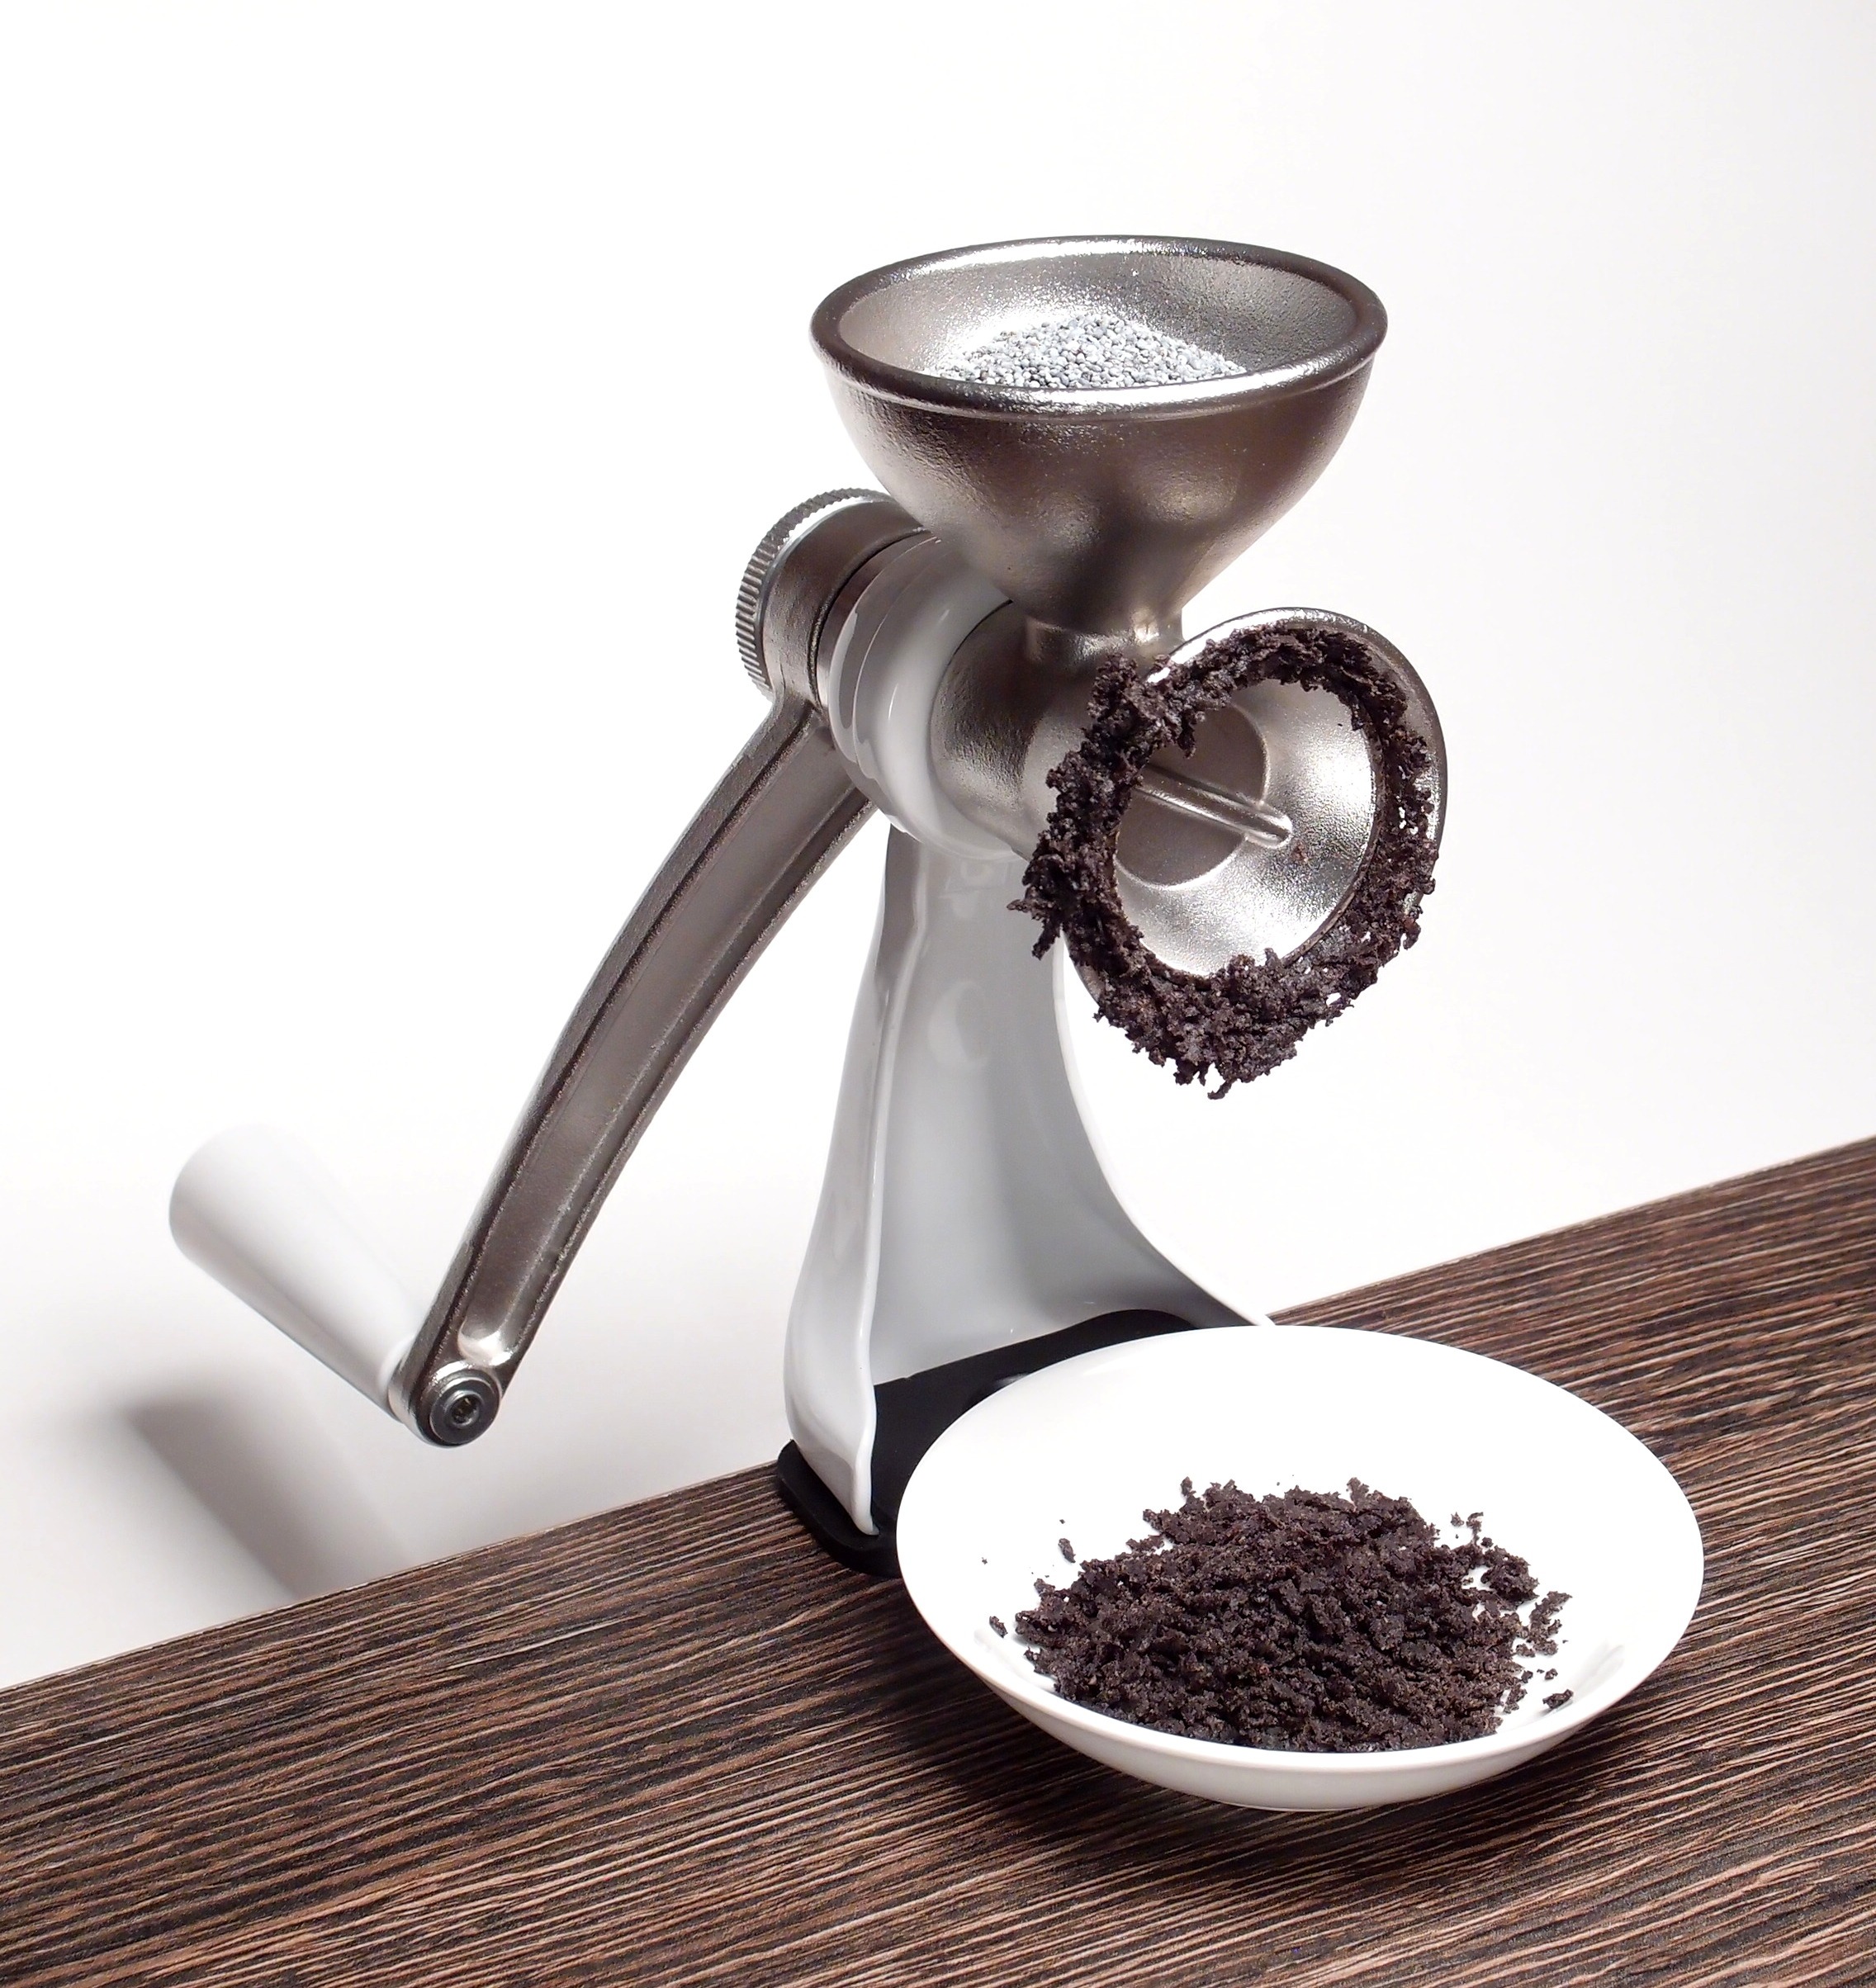 Hand-operated poppy seed grinder